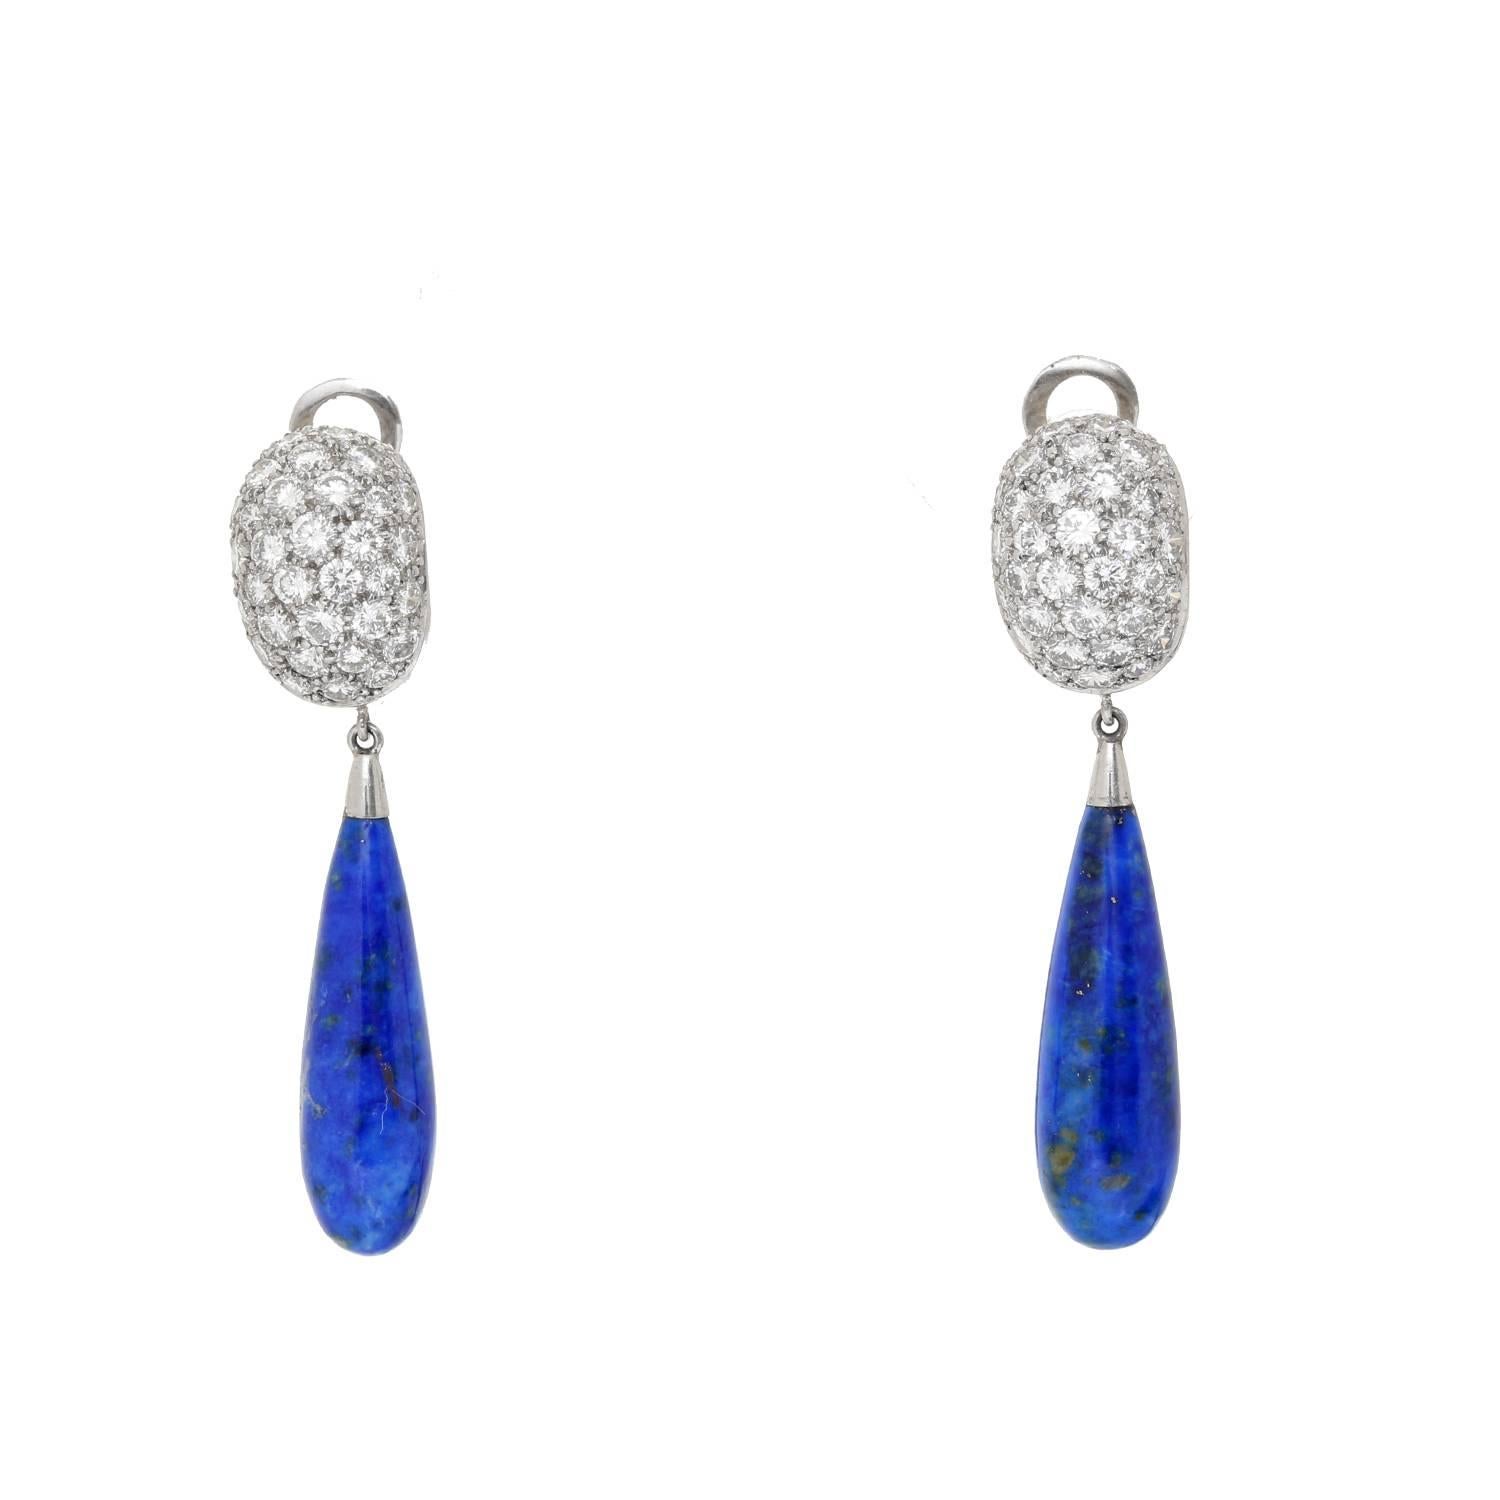 Carvin French Lapis Lazuli Platinum Earrings - . Stunning Carvin French Earrings. Set in platinum with an estimated total diamond weight of 2.35 cts. With a Lapis Lazuli tear drop. Hallmark; Makers Mark. Total length 1 5/8 inch.